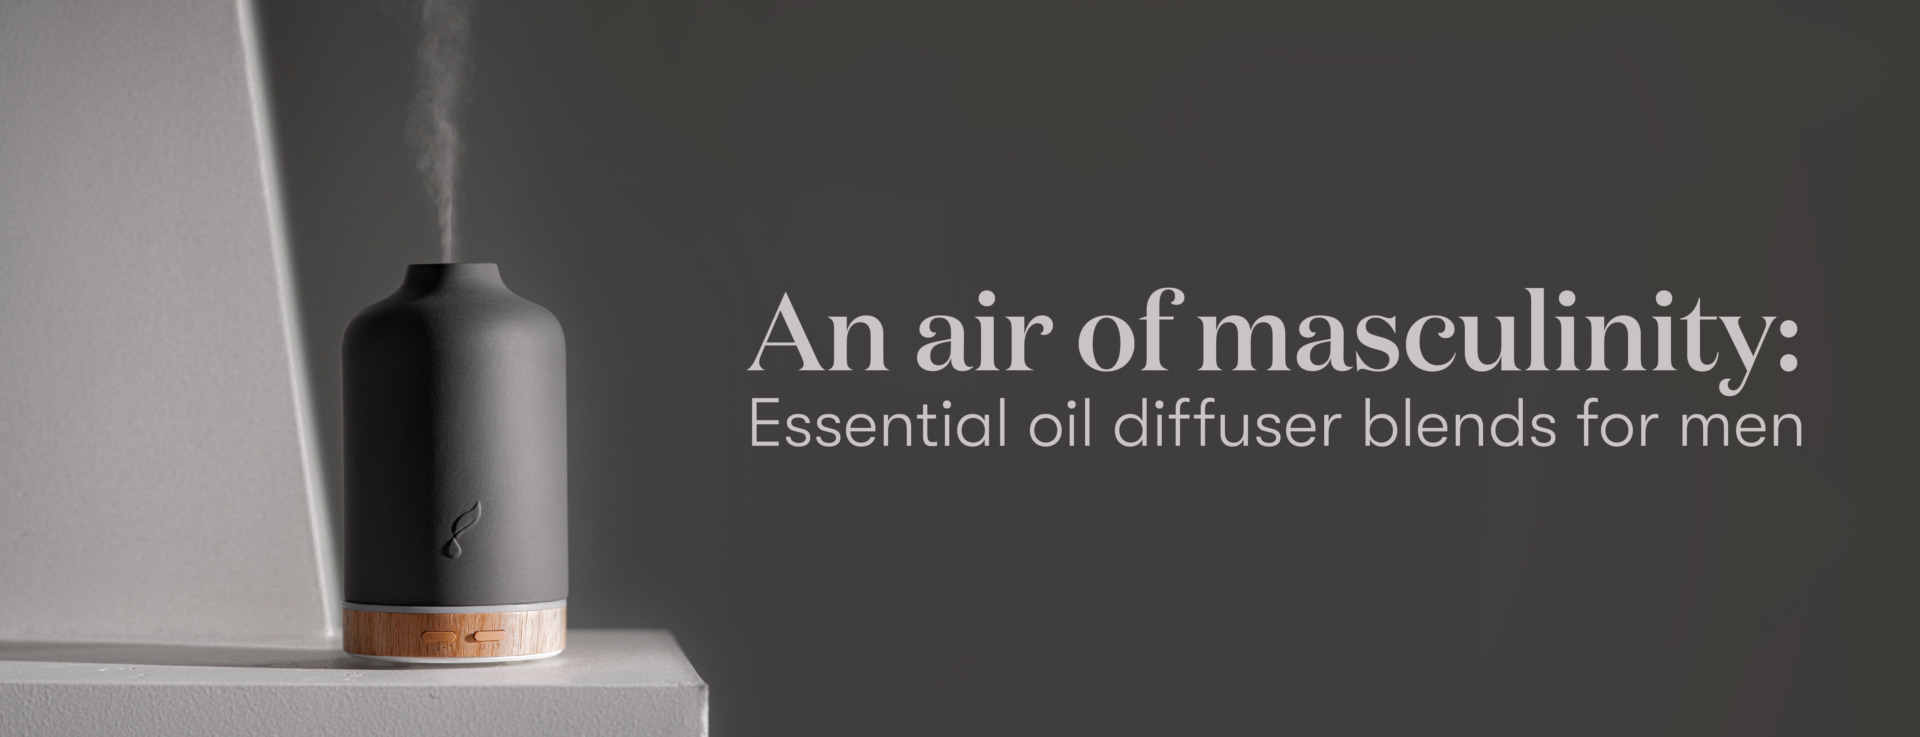 An air of masculinity: Essential oil diffuser blends for men - Young Living Lavender Life Blog